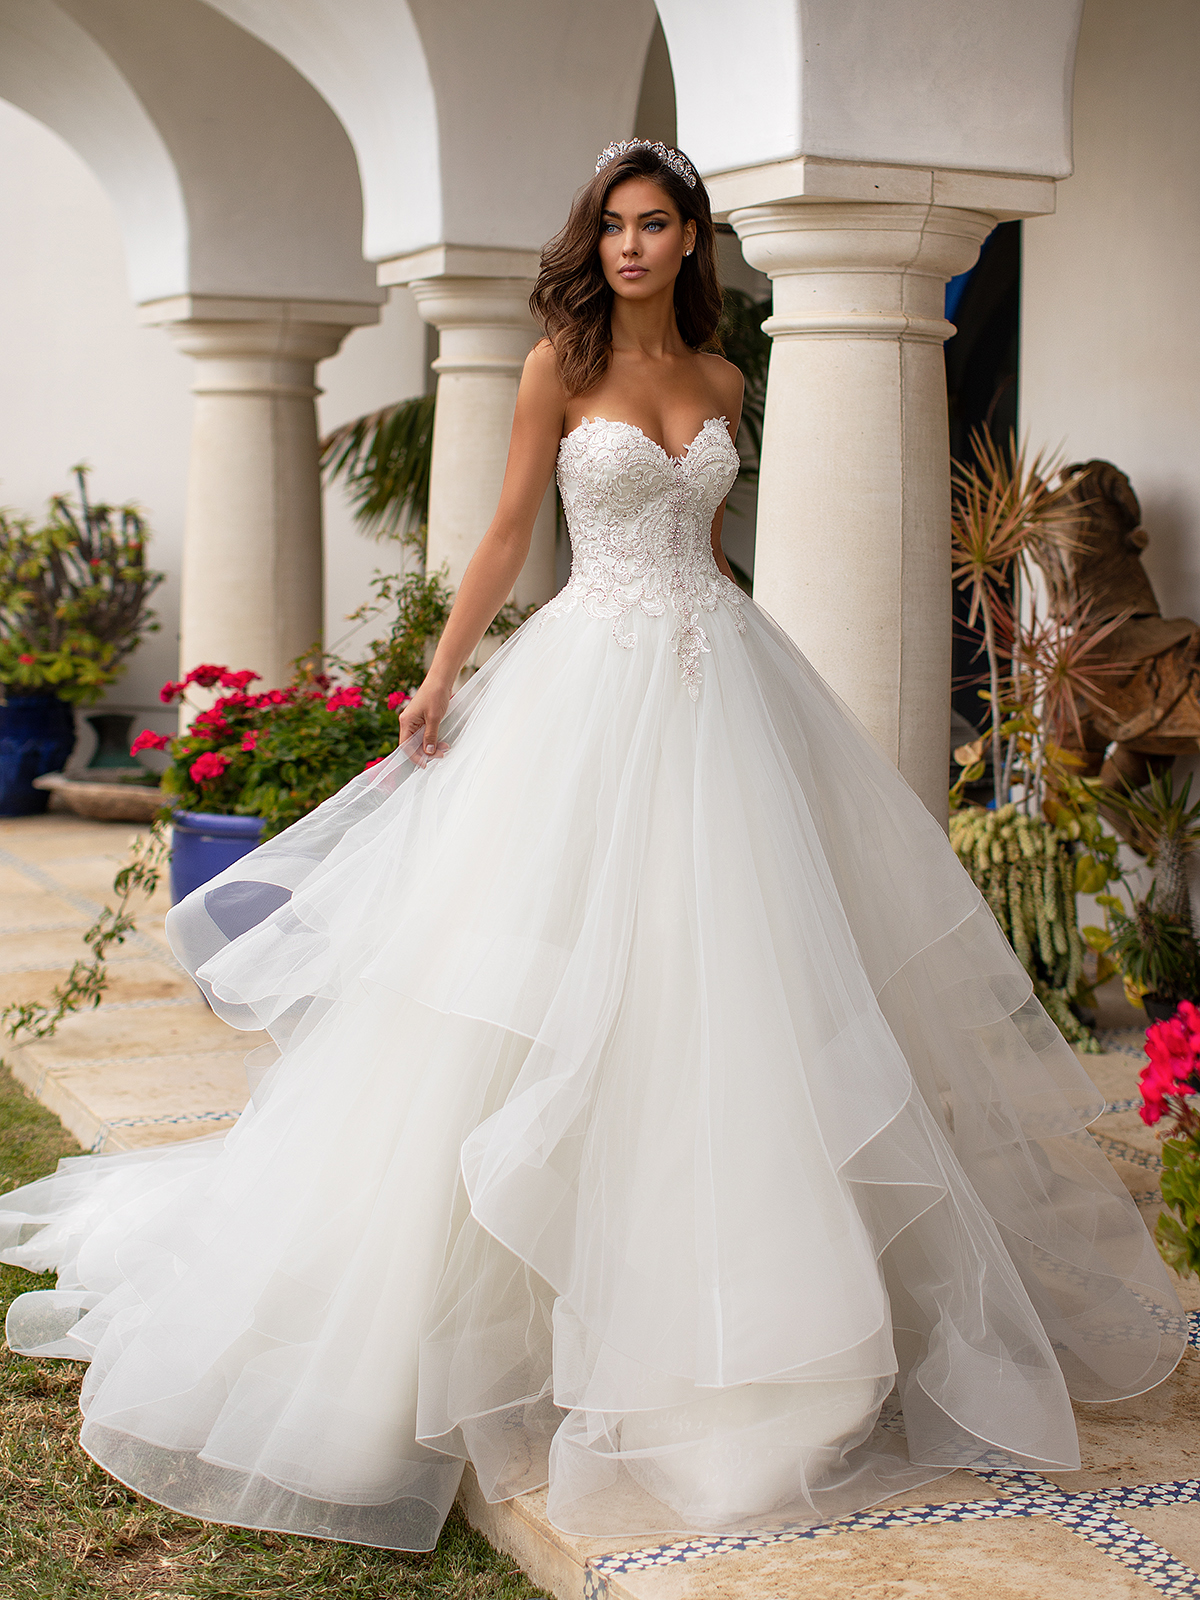 The Guide to Wedding Dress Styles by Body Shape